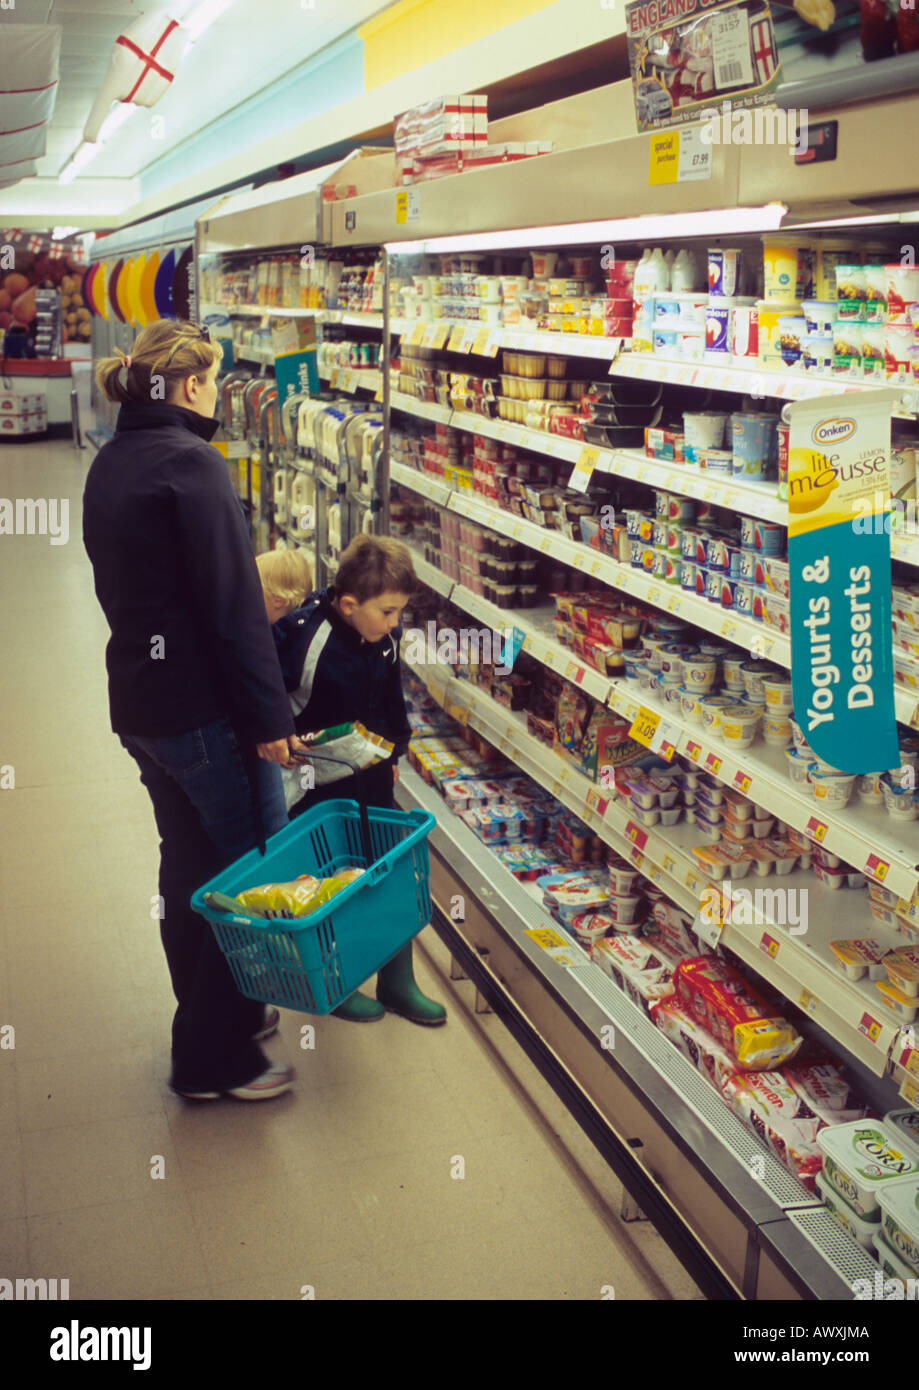 Family Shopping At a Somerfield Supermarket in the Uk Stock Photo